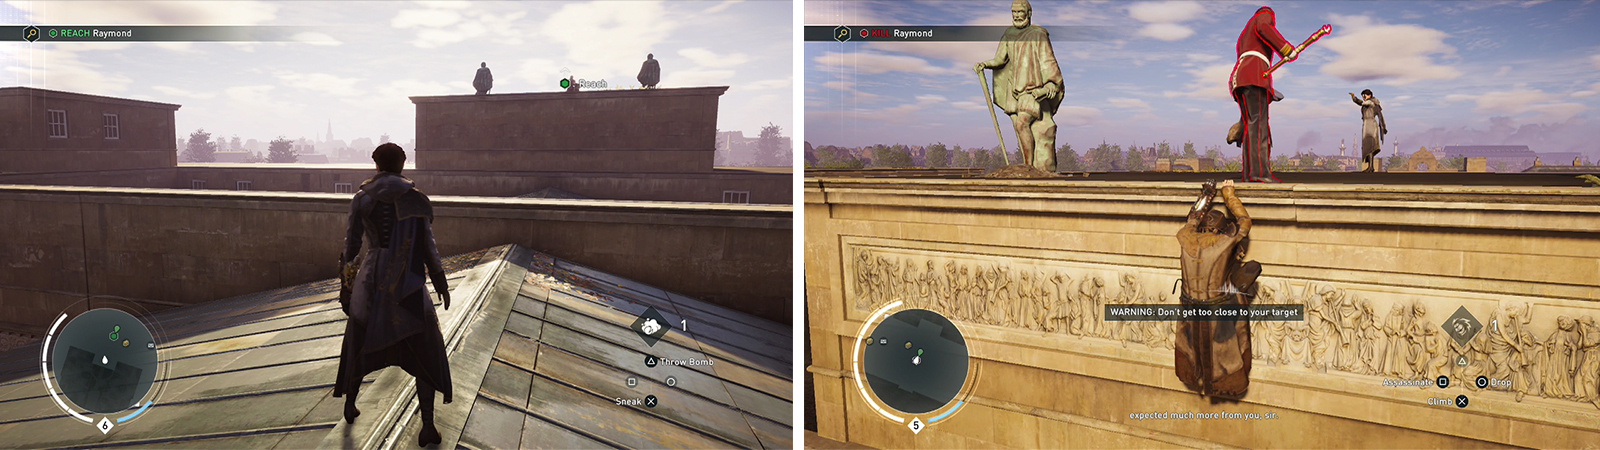 The target will retreat to the roof (left). Stay out of his line of sight, sneak up and kill him (right).